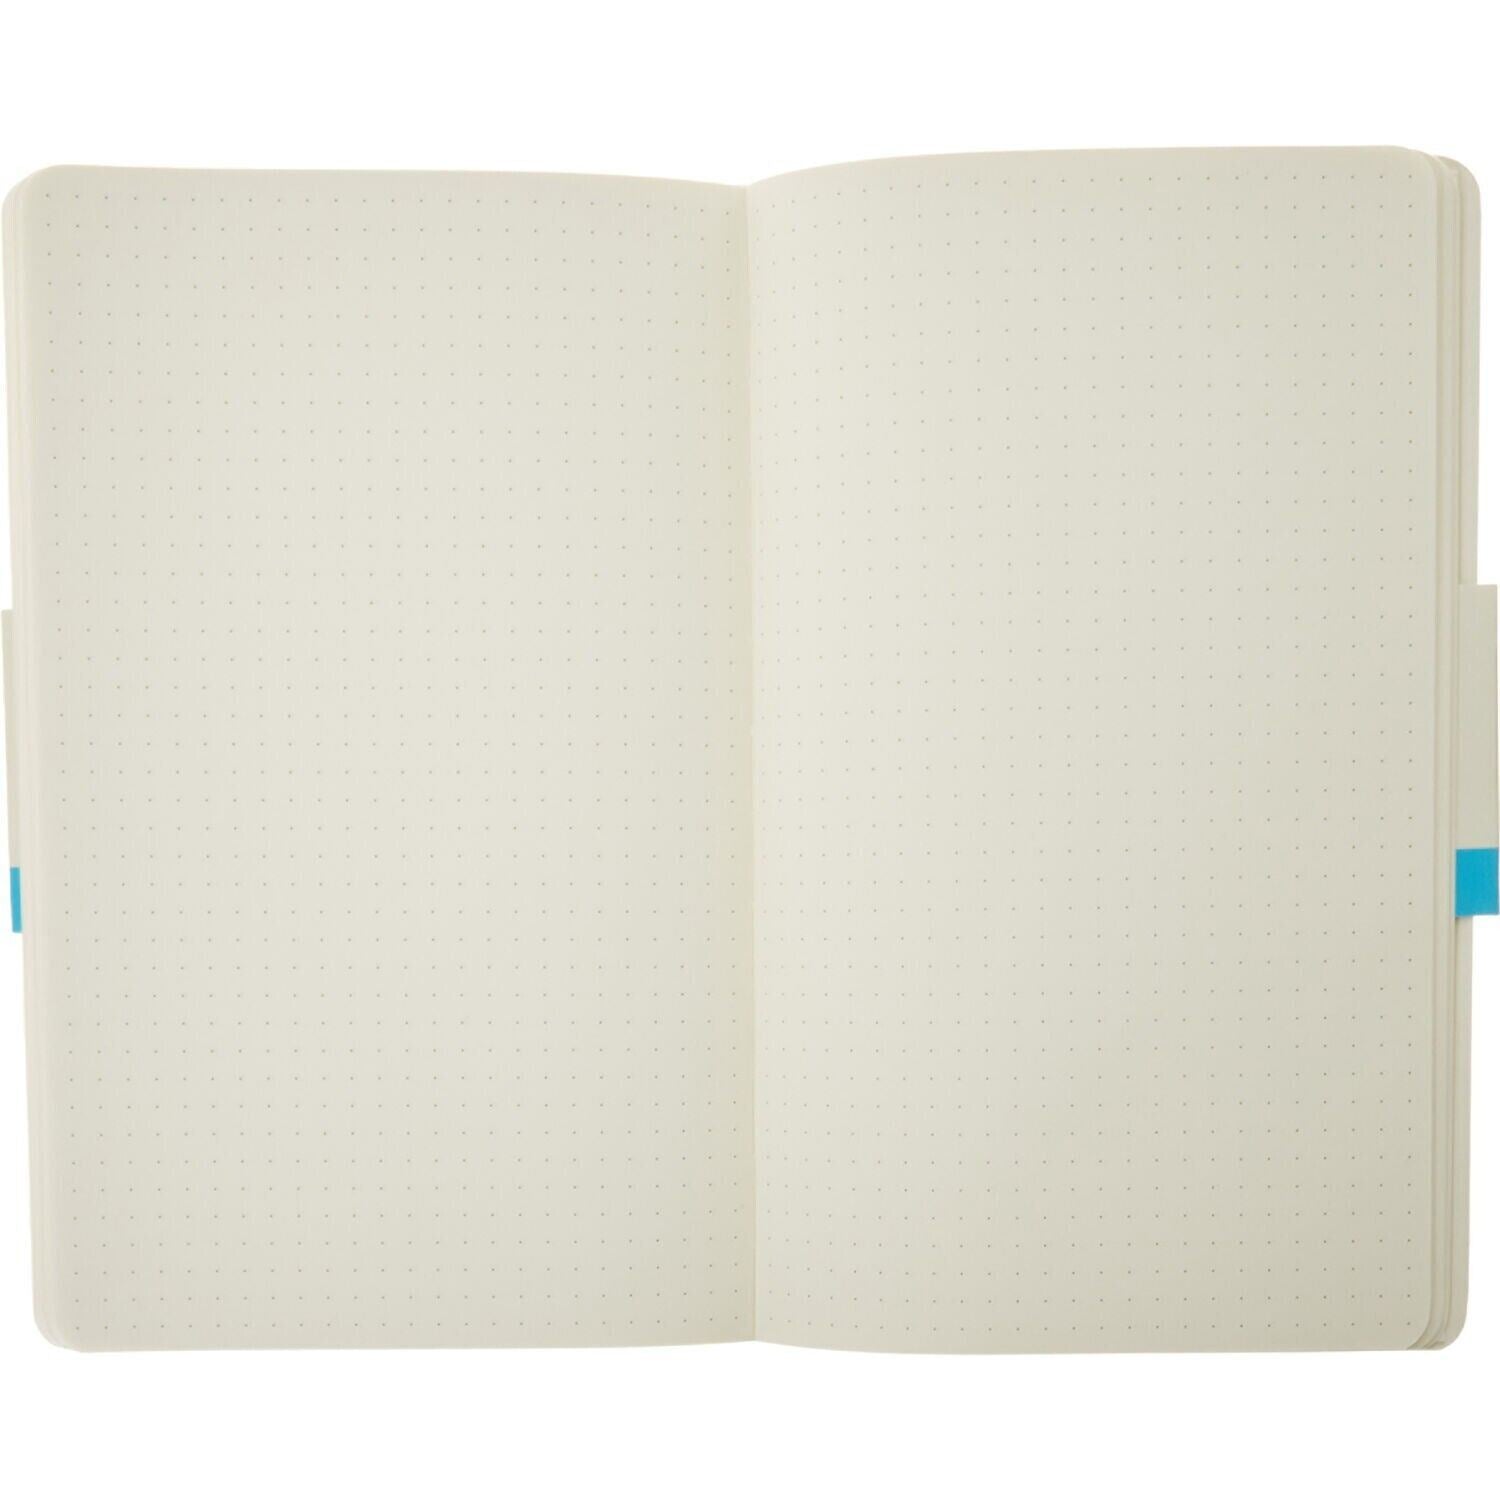 MOLESKINE - Soft Cover Dotted Notebook (Teal), 192 pages,  13cm x 21cm